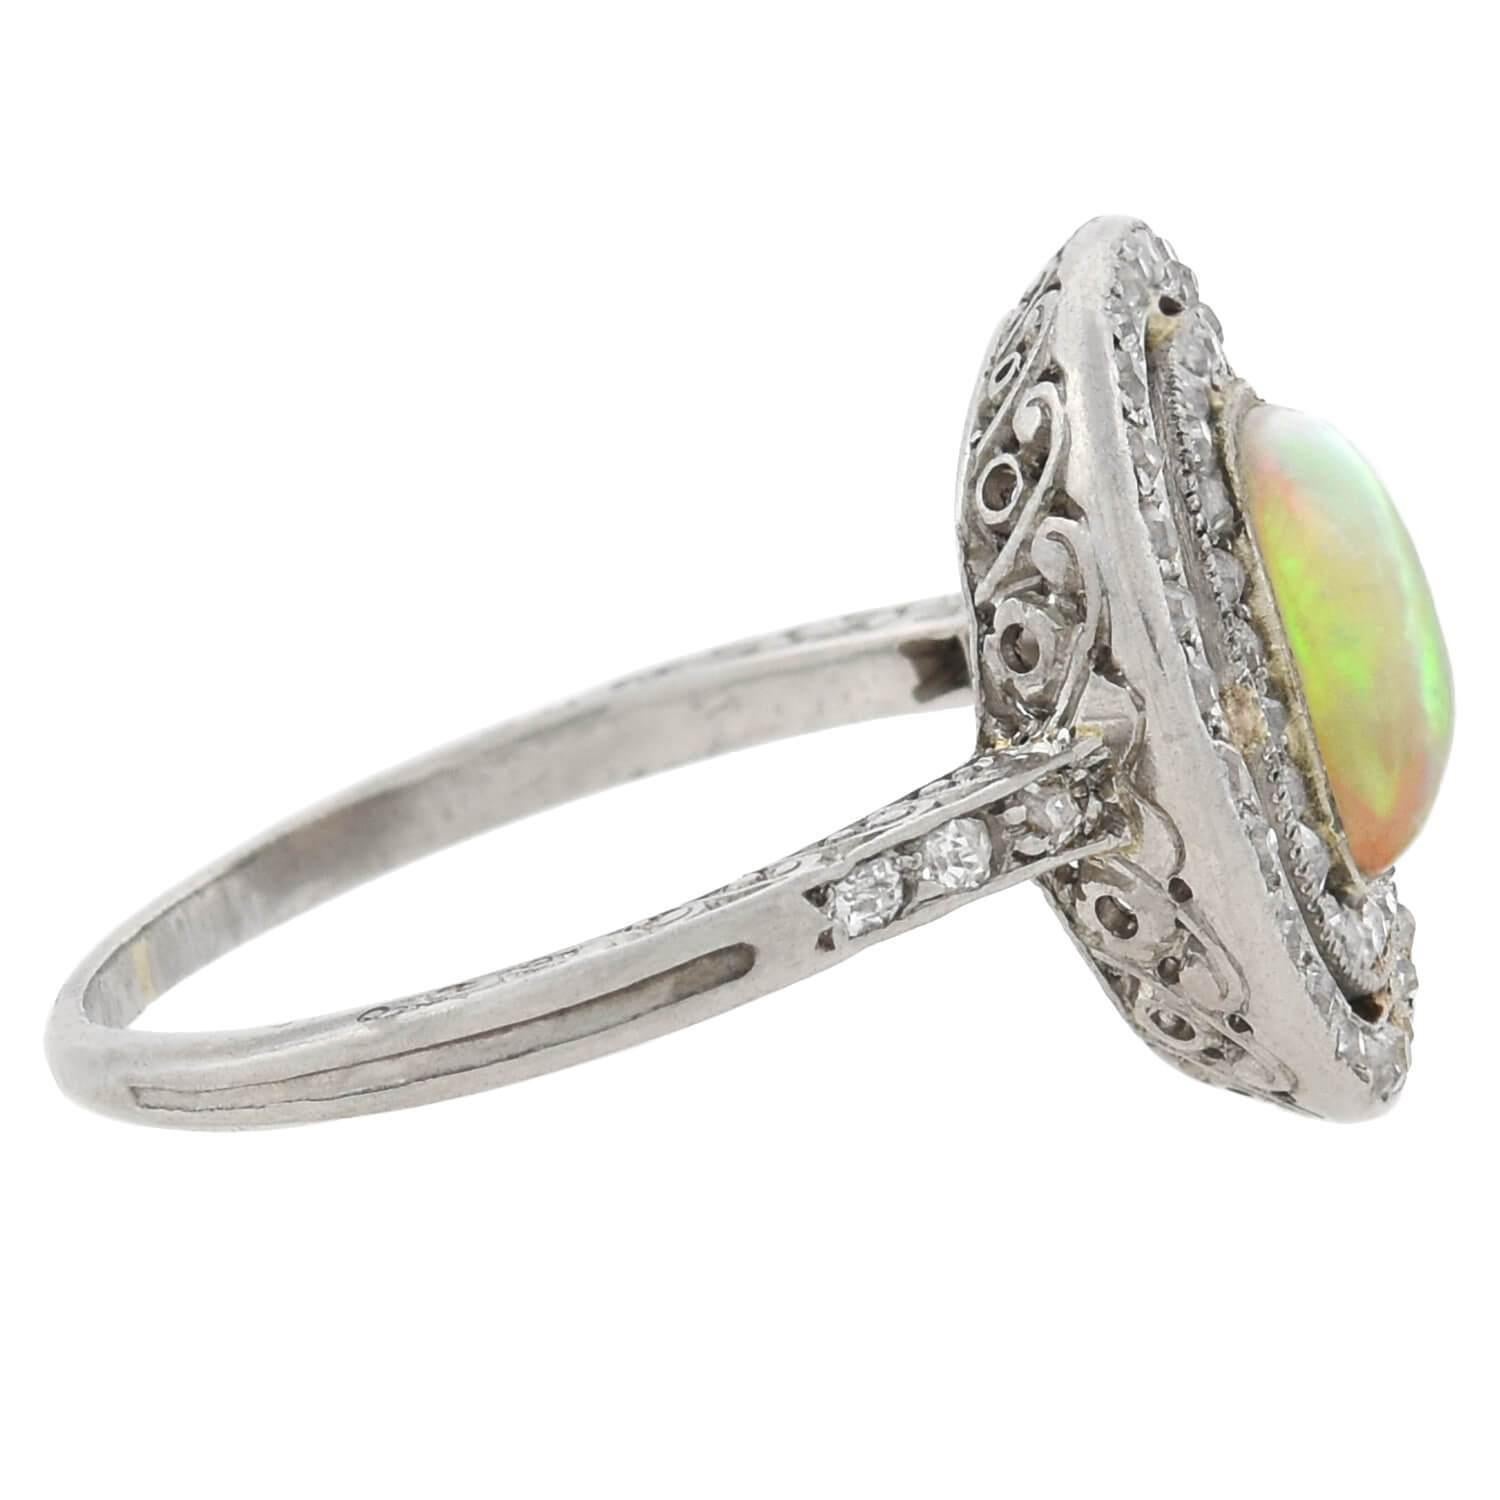 A stunning opal and diamond ring from the Art Deco (ca1920s) era! This fabulous piece is crafted in platinum and features a lovely opal cabochon bezel set at its center. The opal has an alluring quality and a vibrant multitude of colors that vividly